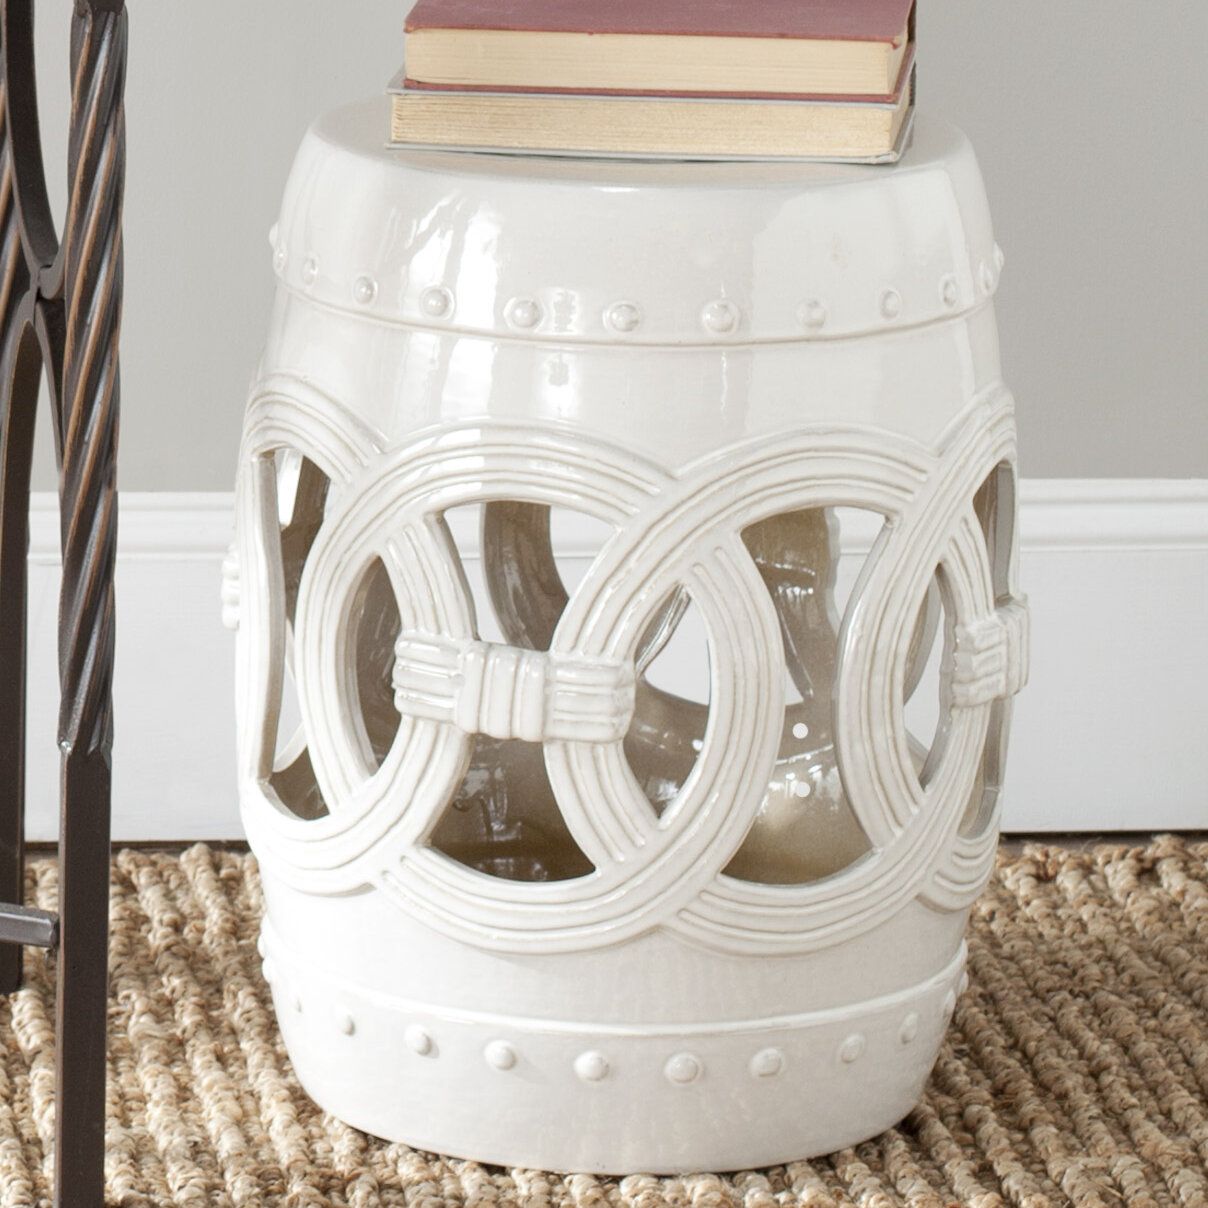 Garden White Accent Stools You'Ll Love In 2020 | Wayfair Throughout Tufan Cement Garden Stools (View 16 of 25)